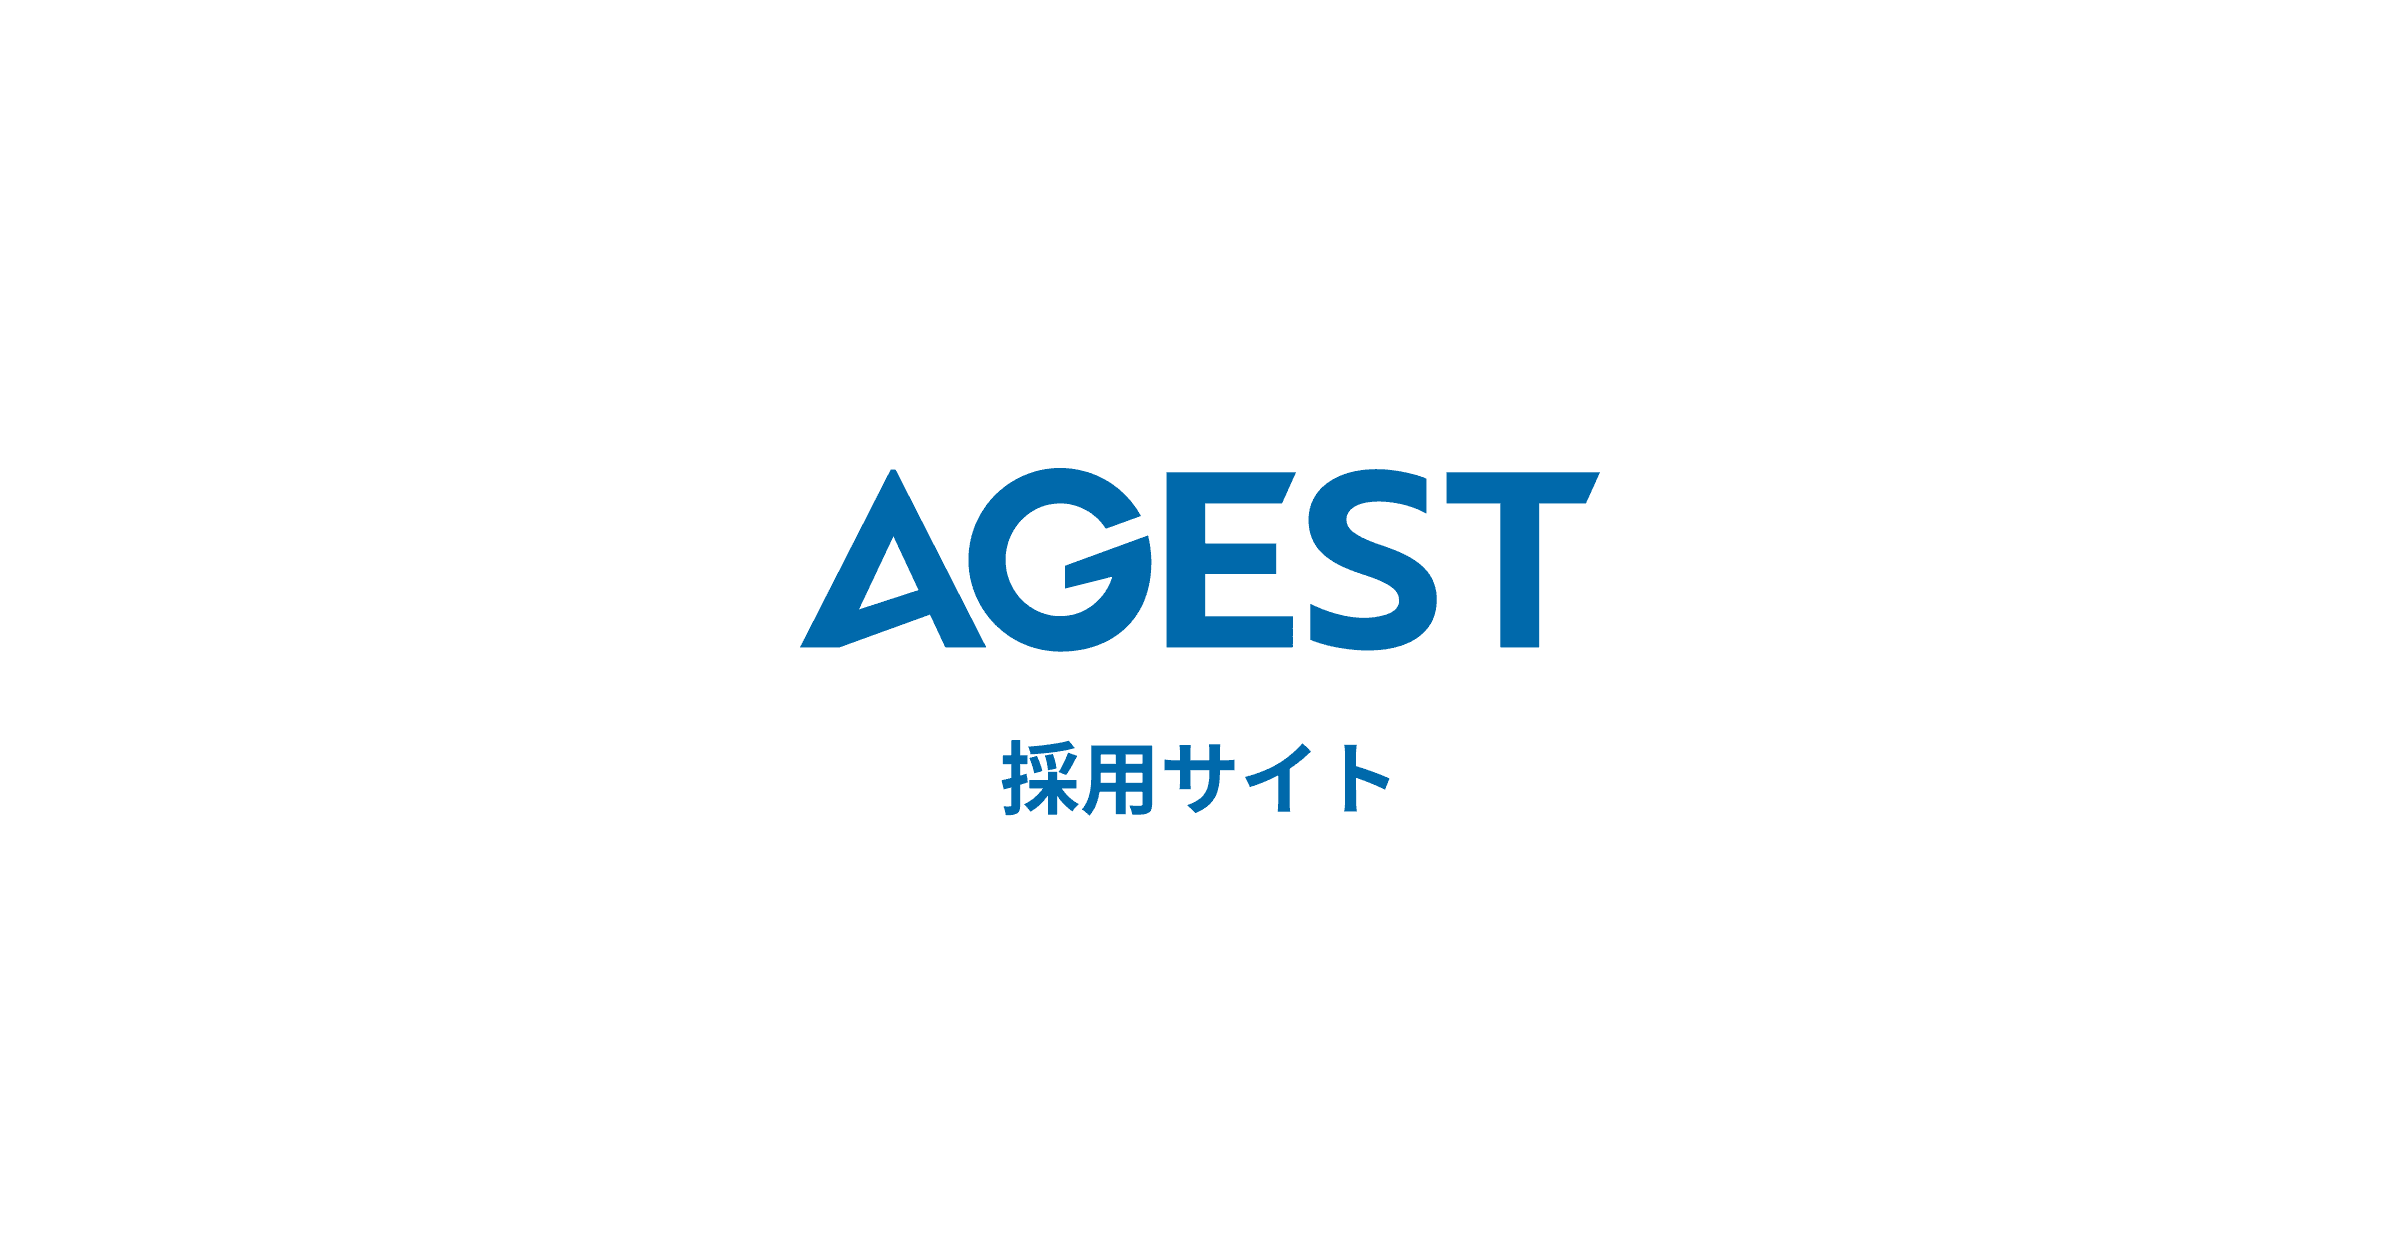 AGEST